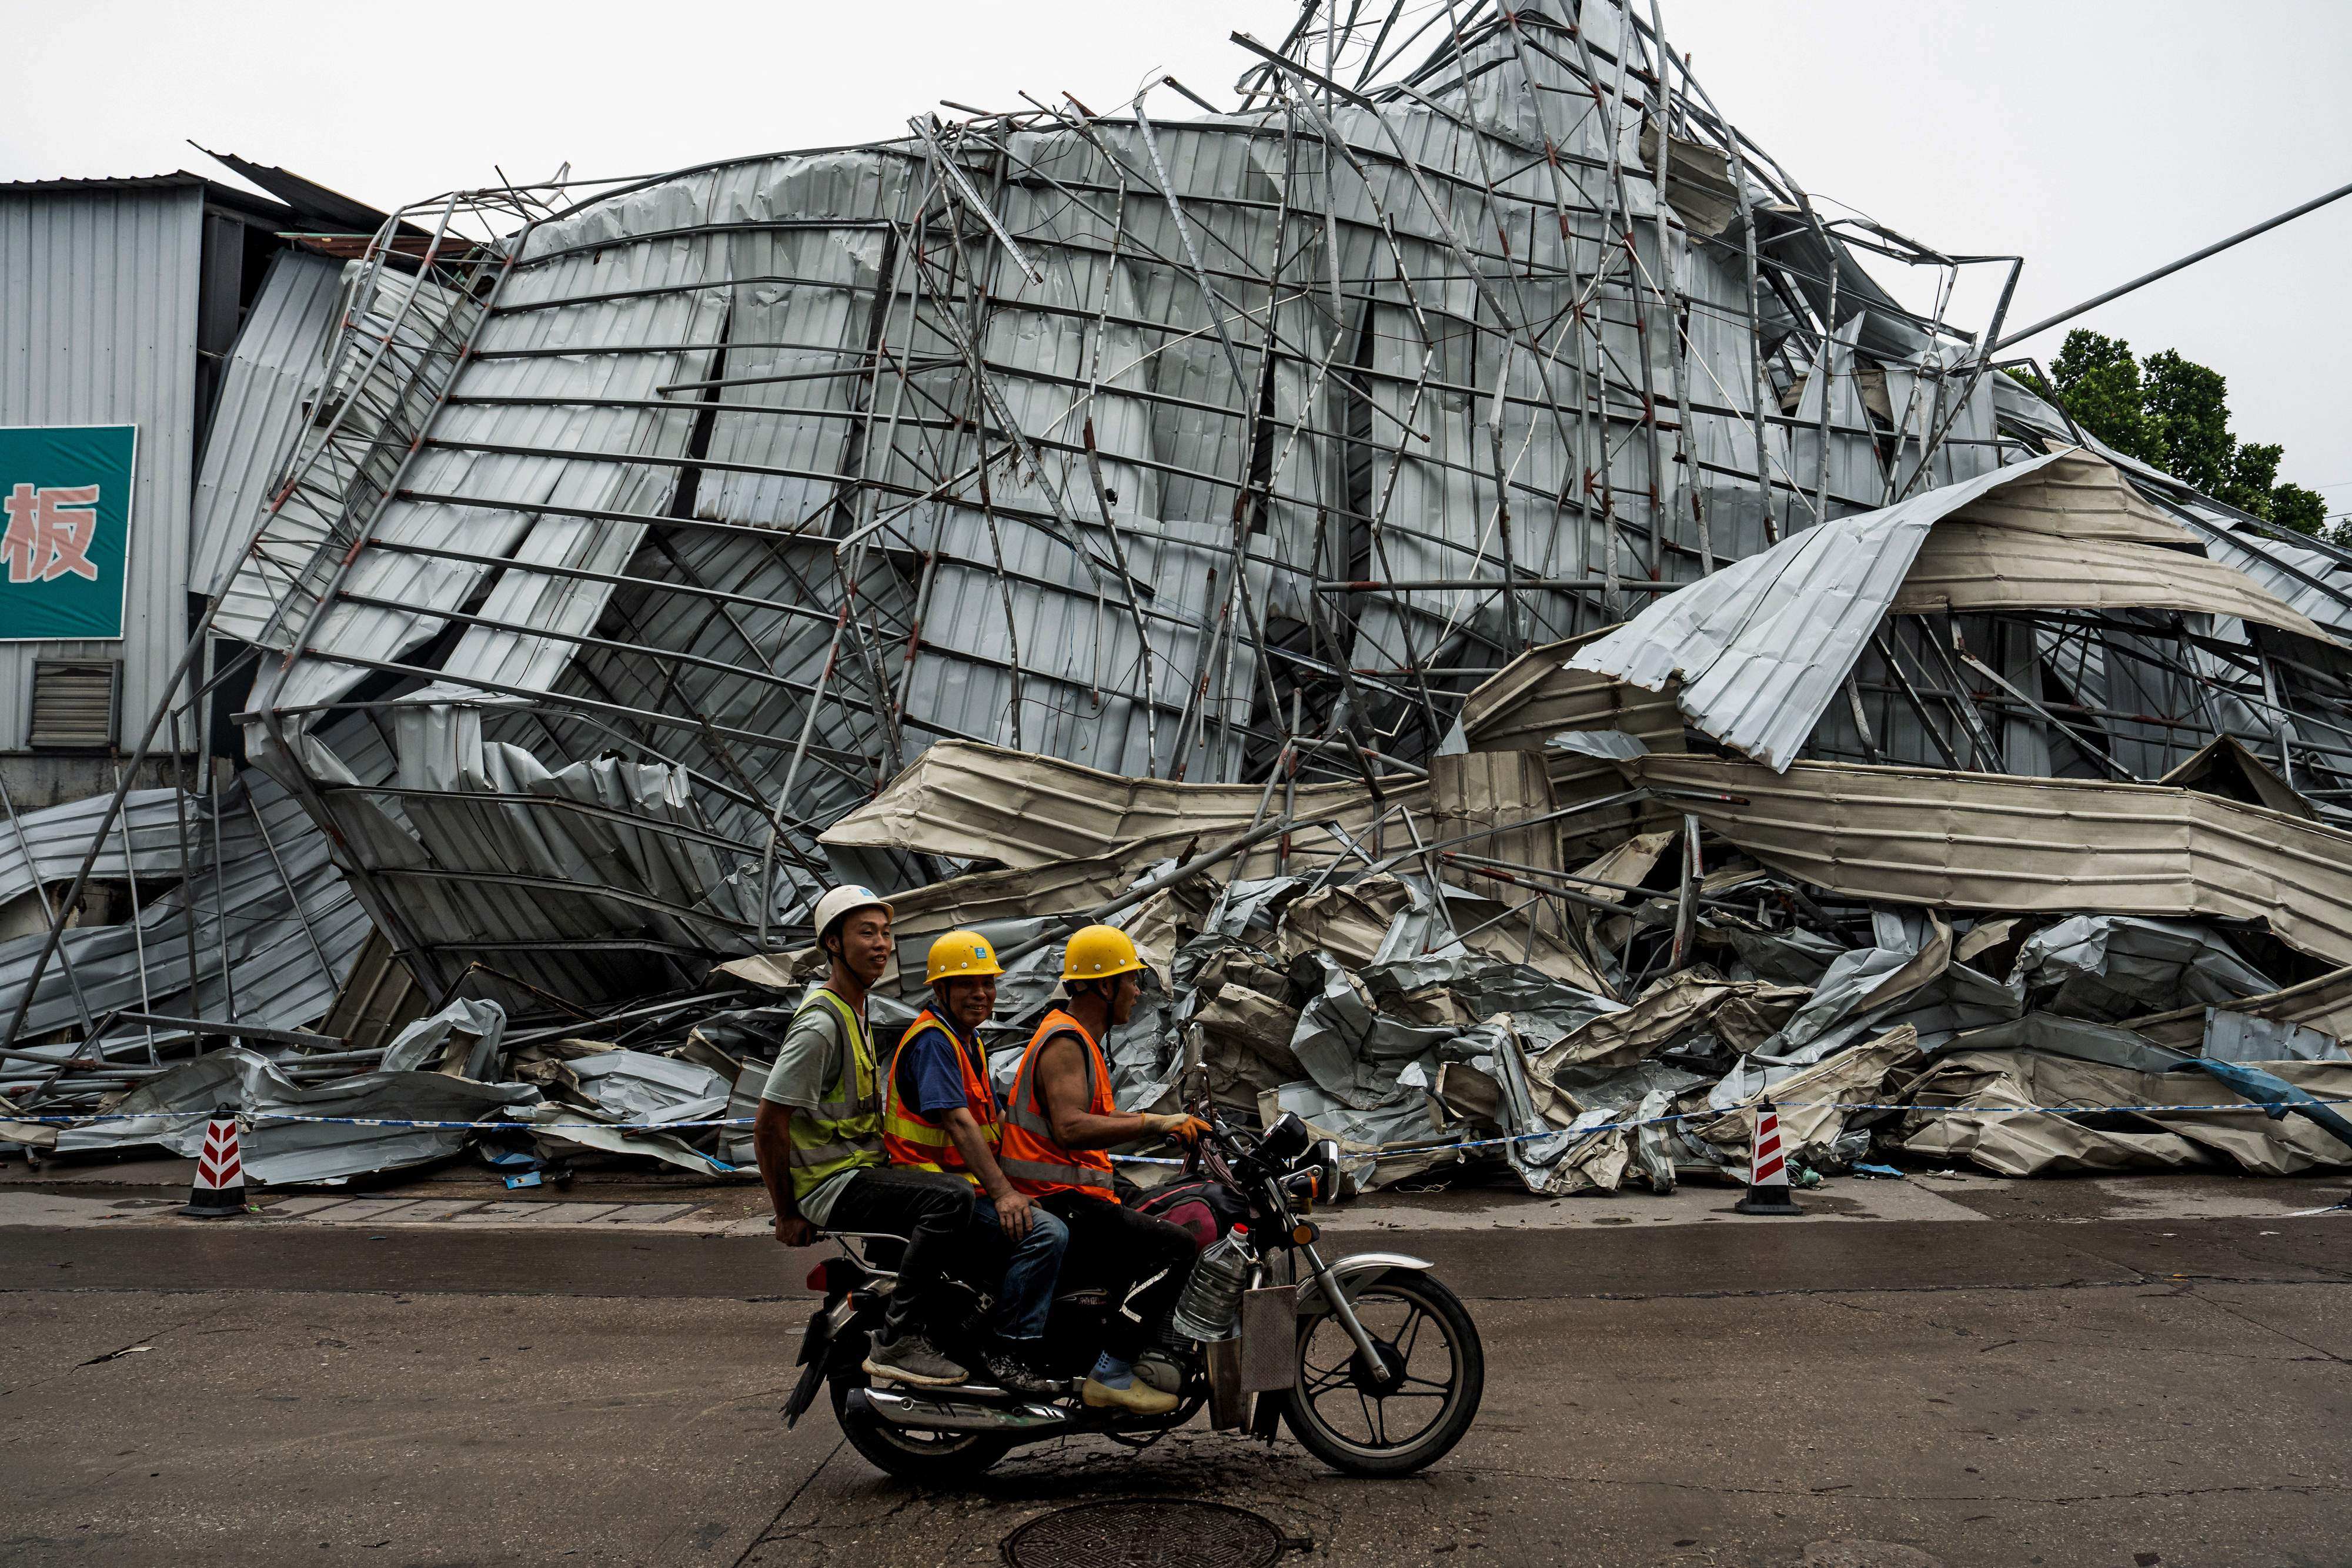 People ride past a building wrecked after a tornado hit Guangzhou, in southern China’s Guangdong province at the weekend. Photo: AFP